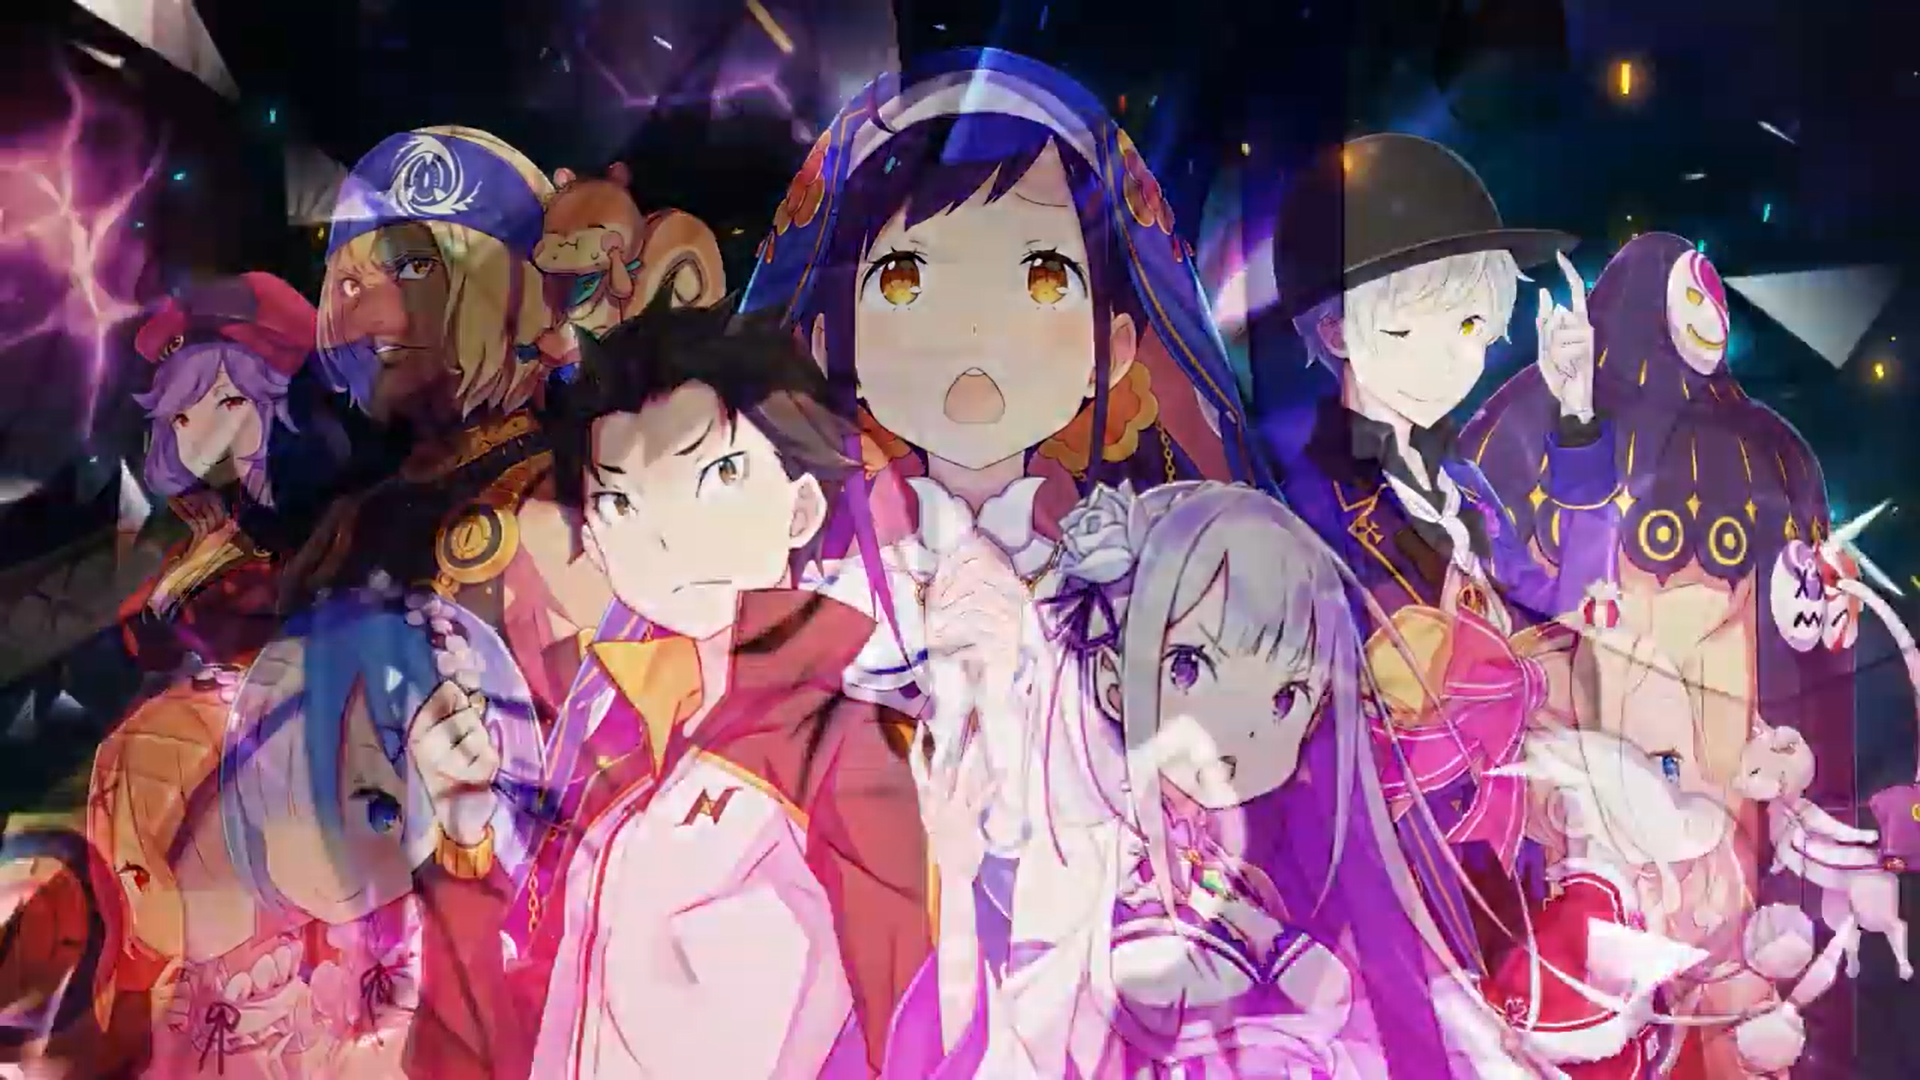 Re:Zero -starting Life in another World- the Prophecy of the Throne. Re Zero эндинг. Re Zero the Prophecy of the Throne русификатор. Re:Zero – starting Life in another World: the Prophecy of the Throne русификатор.